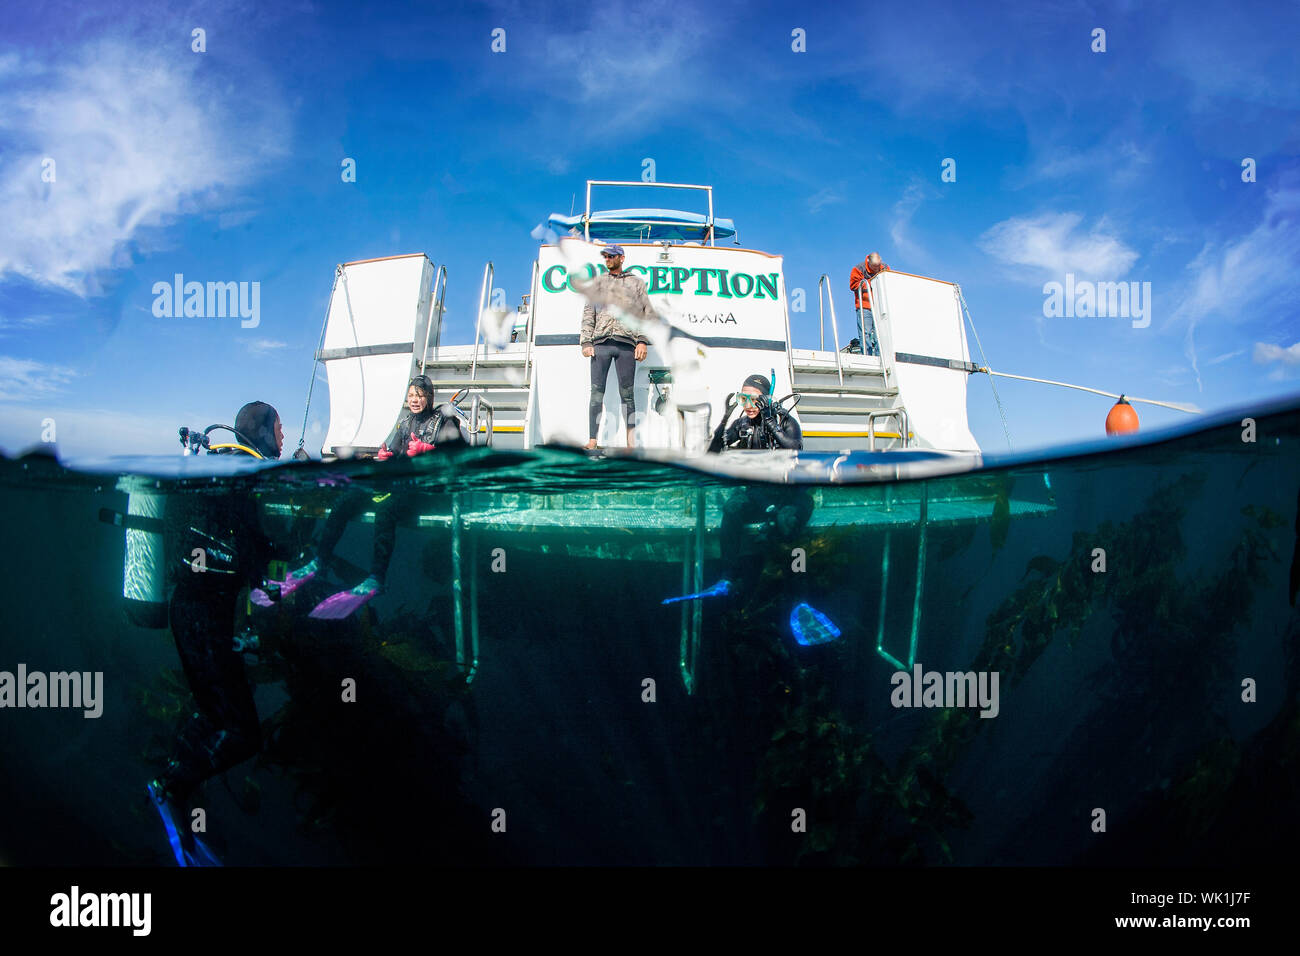 Truth Aquatics SCUBA dive boat the Conception was burned while at sea on September 2, 2019.  The tragic event killed 34 passengers. Stock Photo